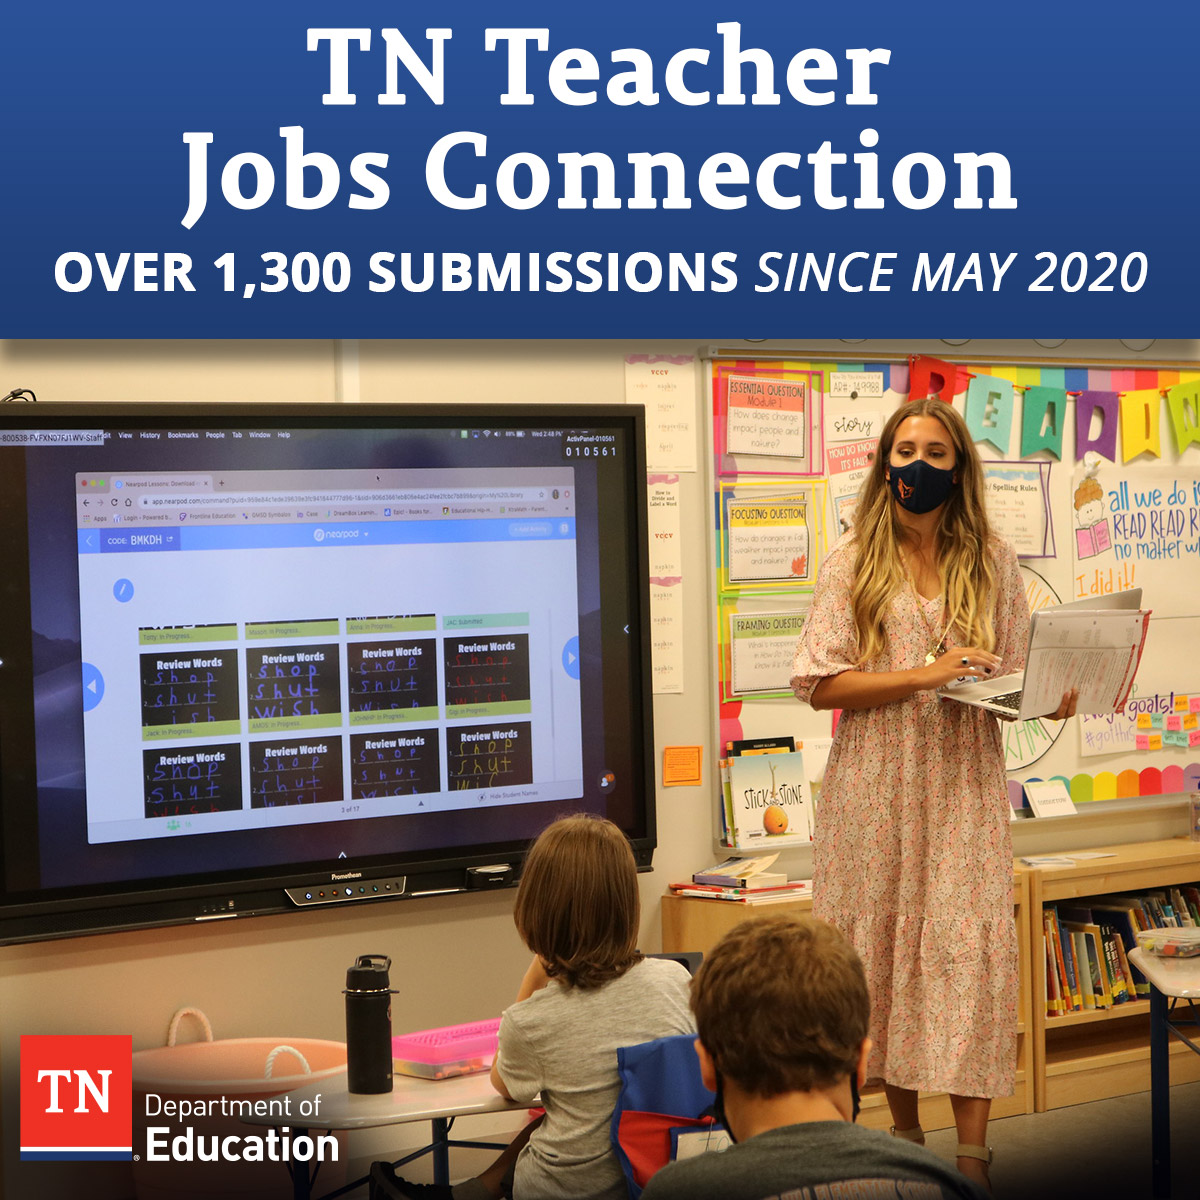 TN Teacher Jobs Connection Receives Over 1,300 Submissions Since May